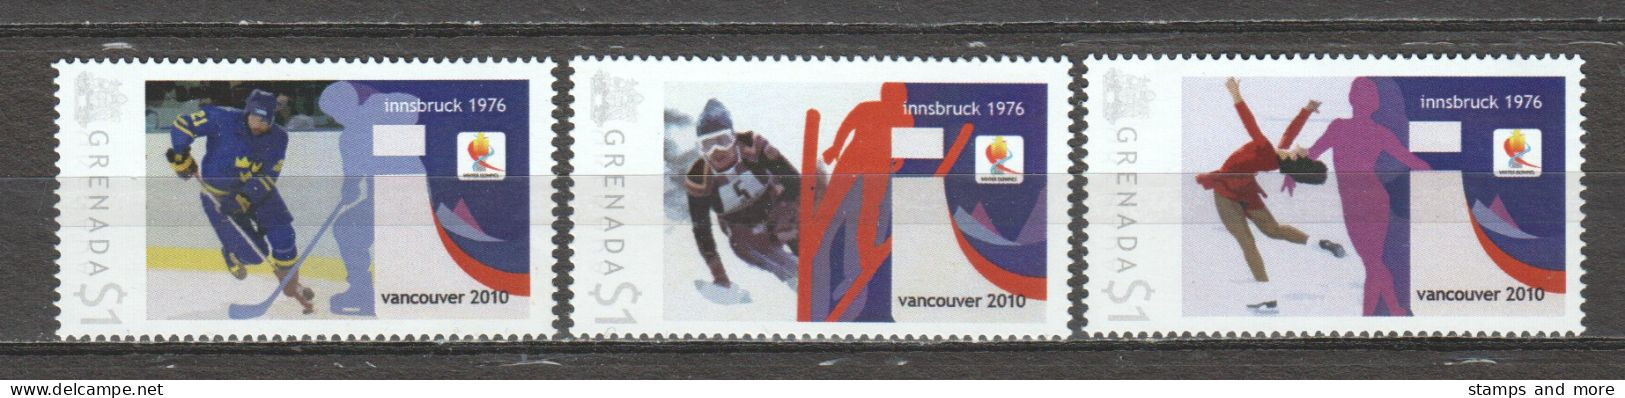 Grenada - Limited Edition Serie 12 MNH - WINTER OLYMPICS VANCOUVER 2010 - INNSBRUCK 1976 - Hiver 2010: Vancouver